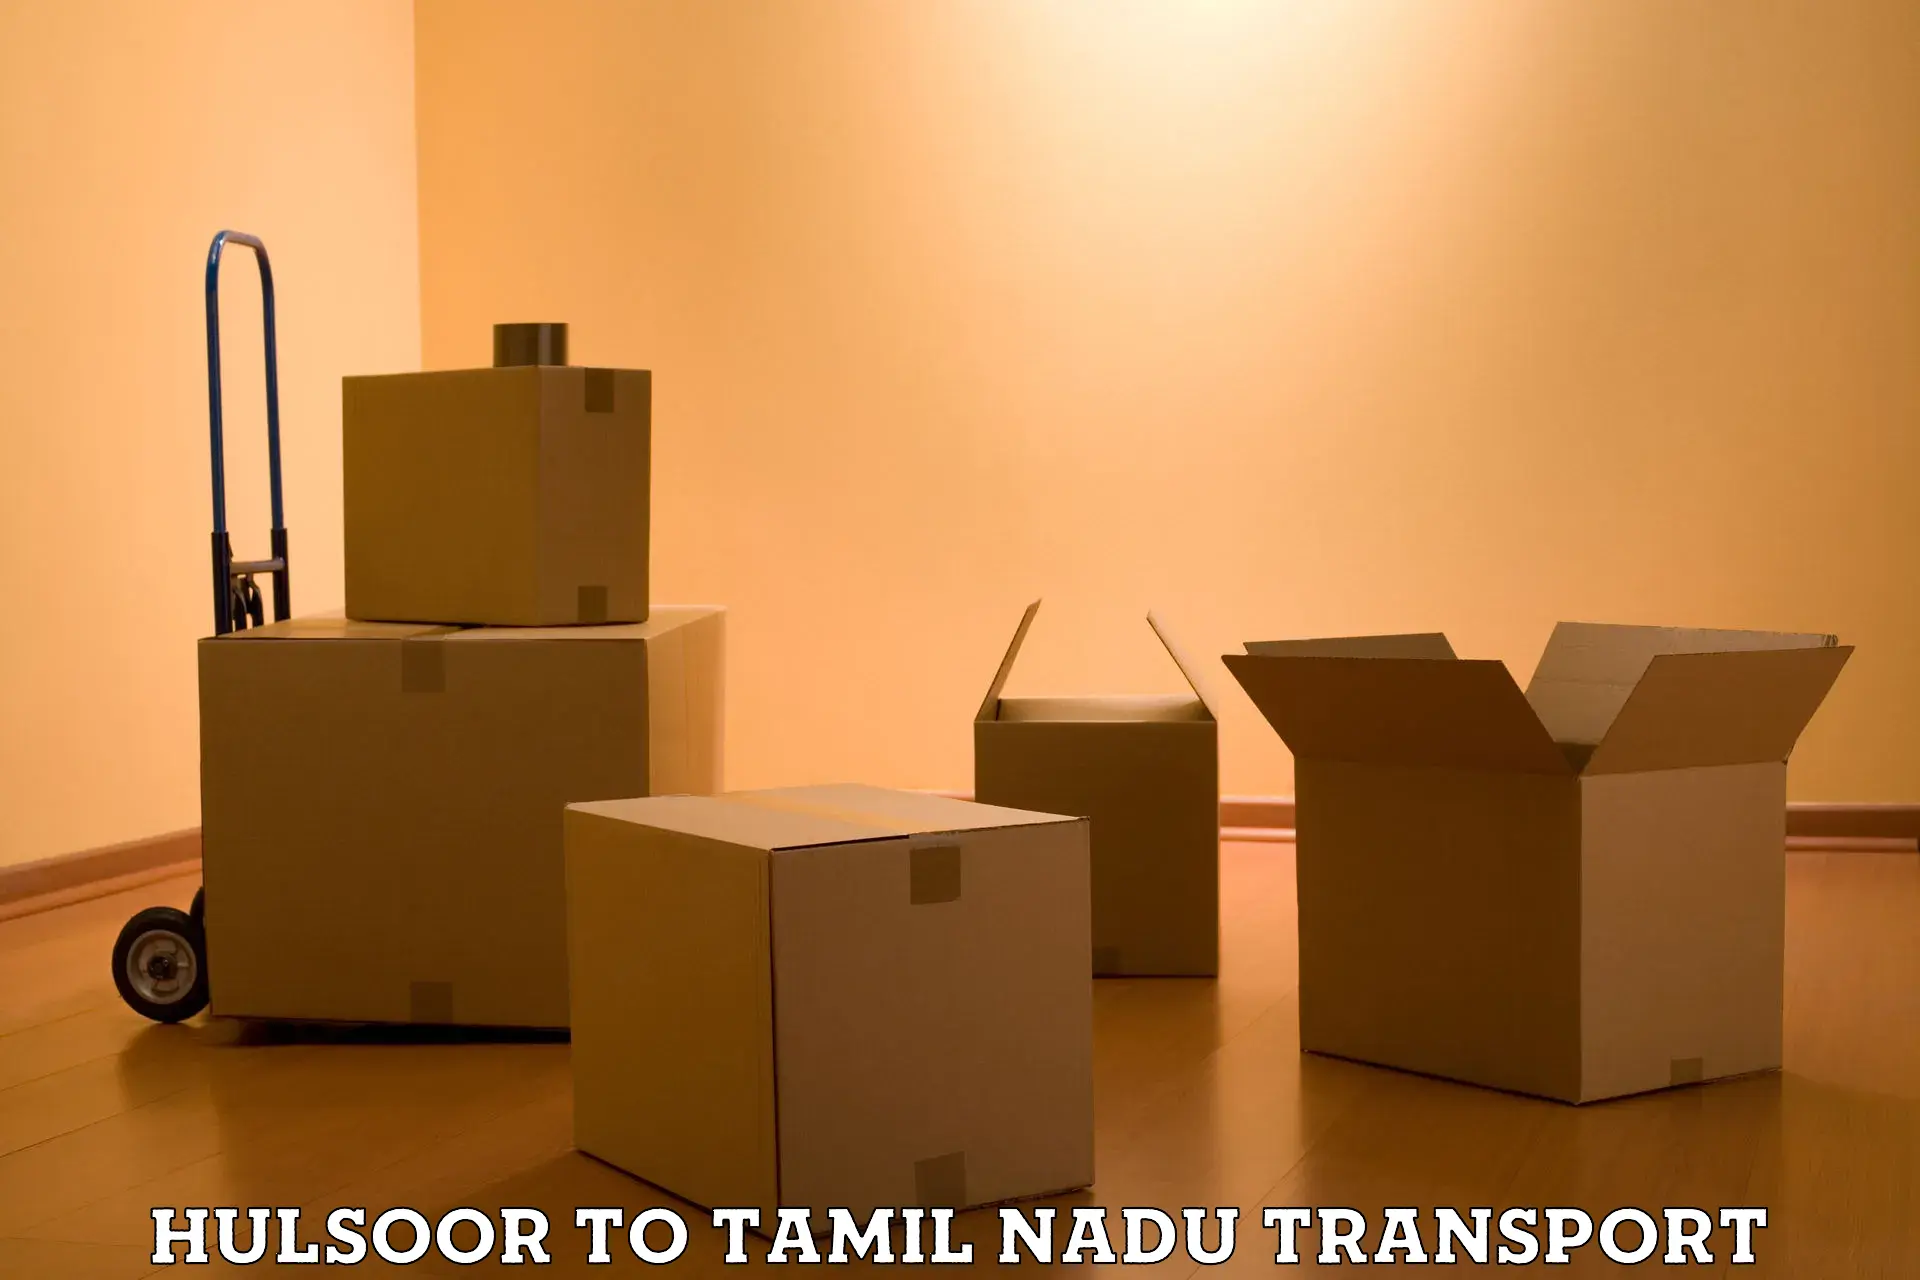 Daily parcel service transport Hulsoor to Hosur